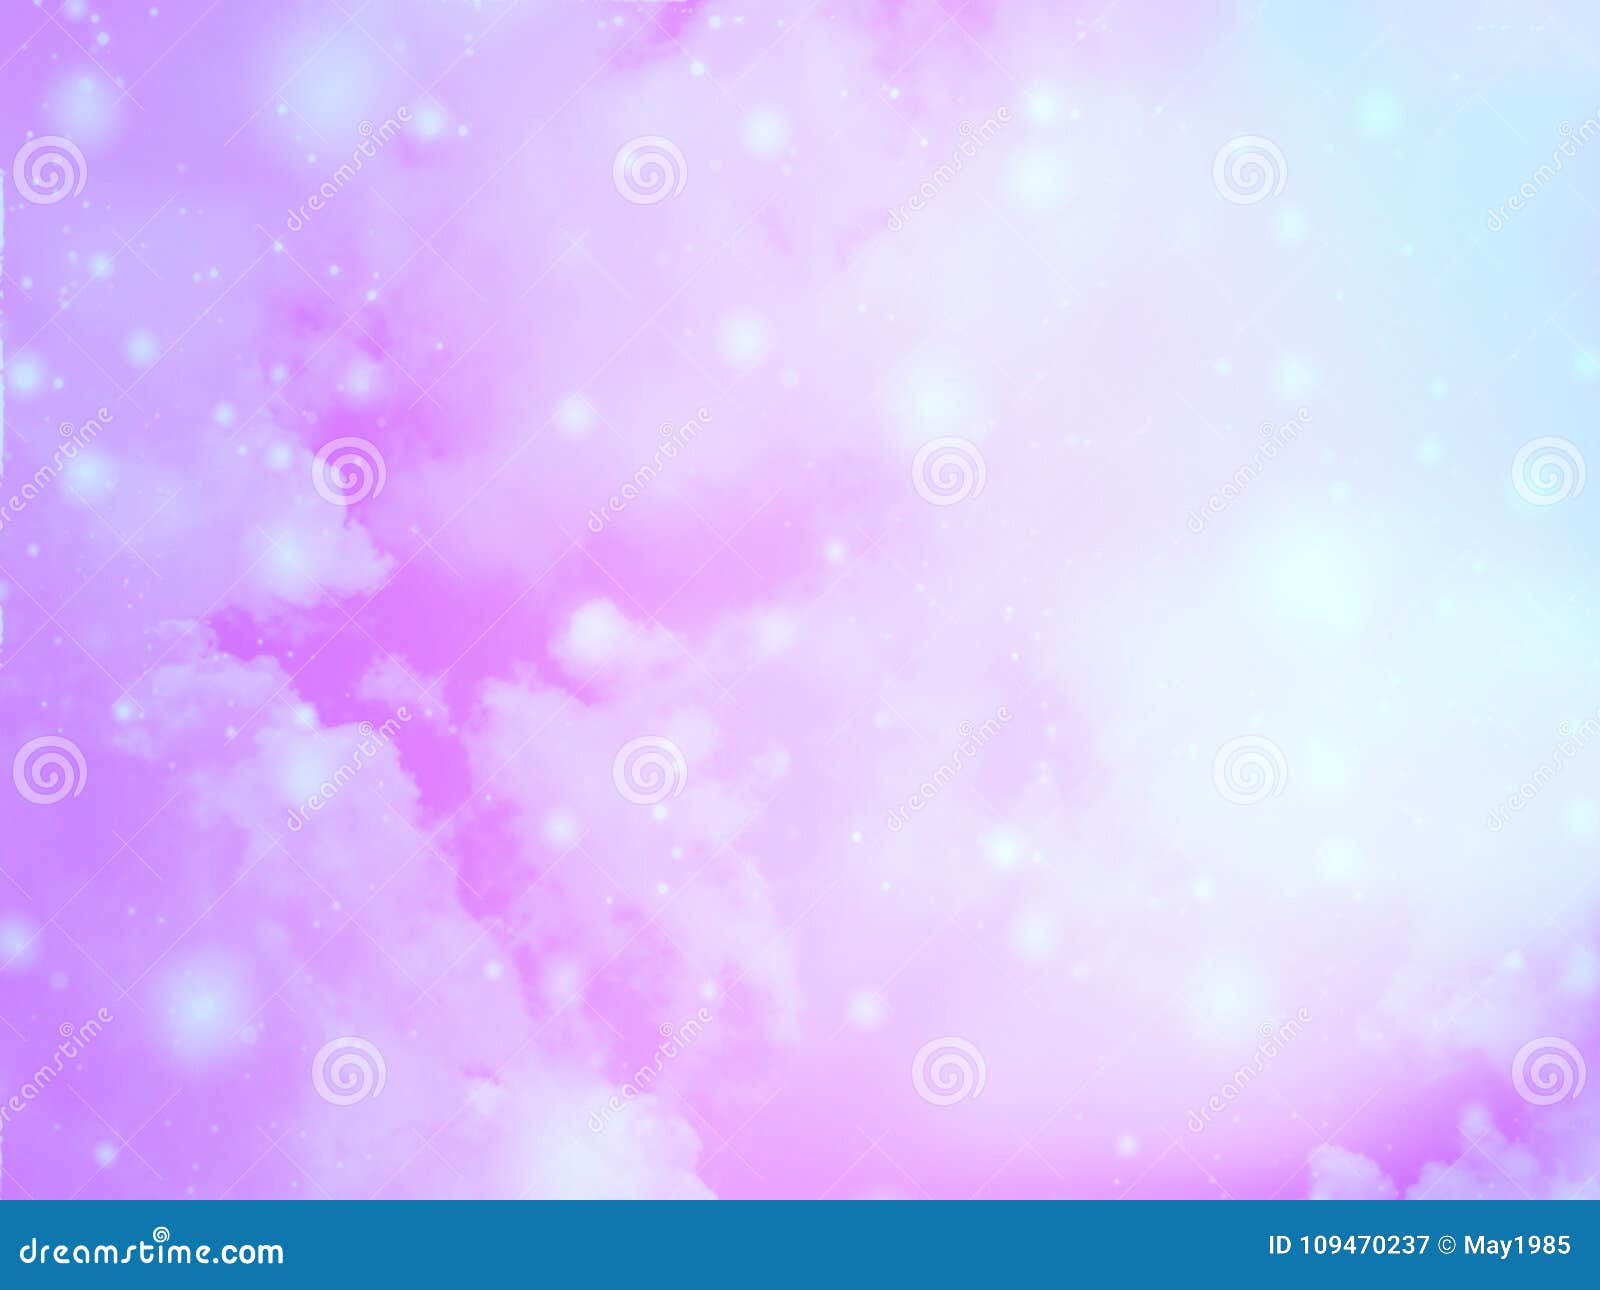 blurred colorful background sky with bokeh white lucent lights blurry